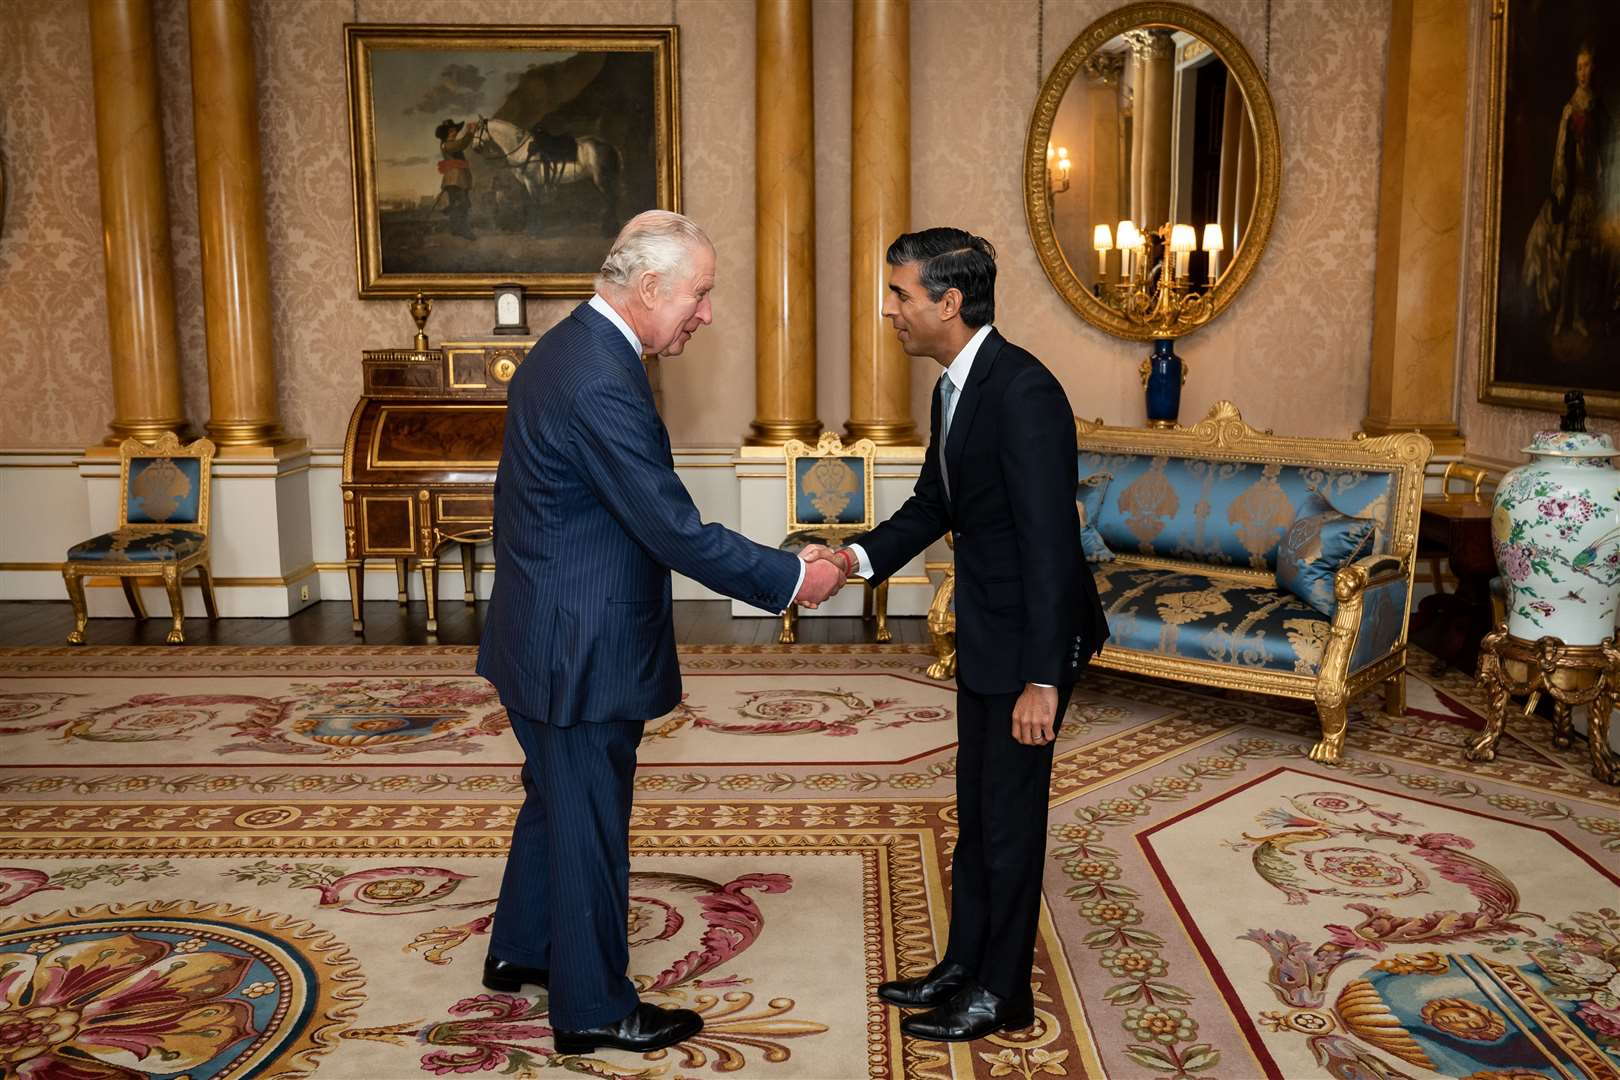 The King welcomes Rishi Sunak during an audience at Buckingham Palace, where he invited the newly-elected Conservative Party leader to become prime minister and form a new government (Aaron Chown/PA)